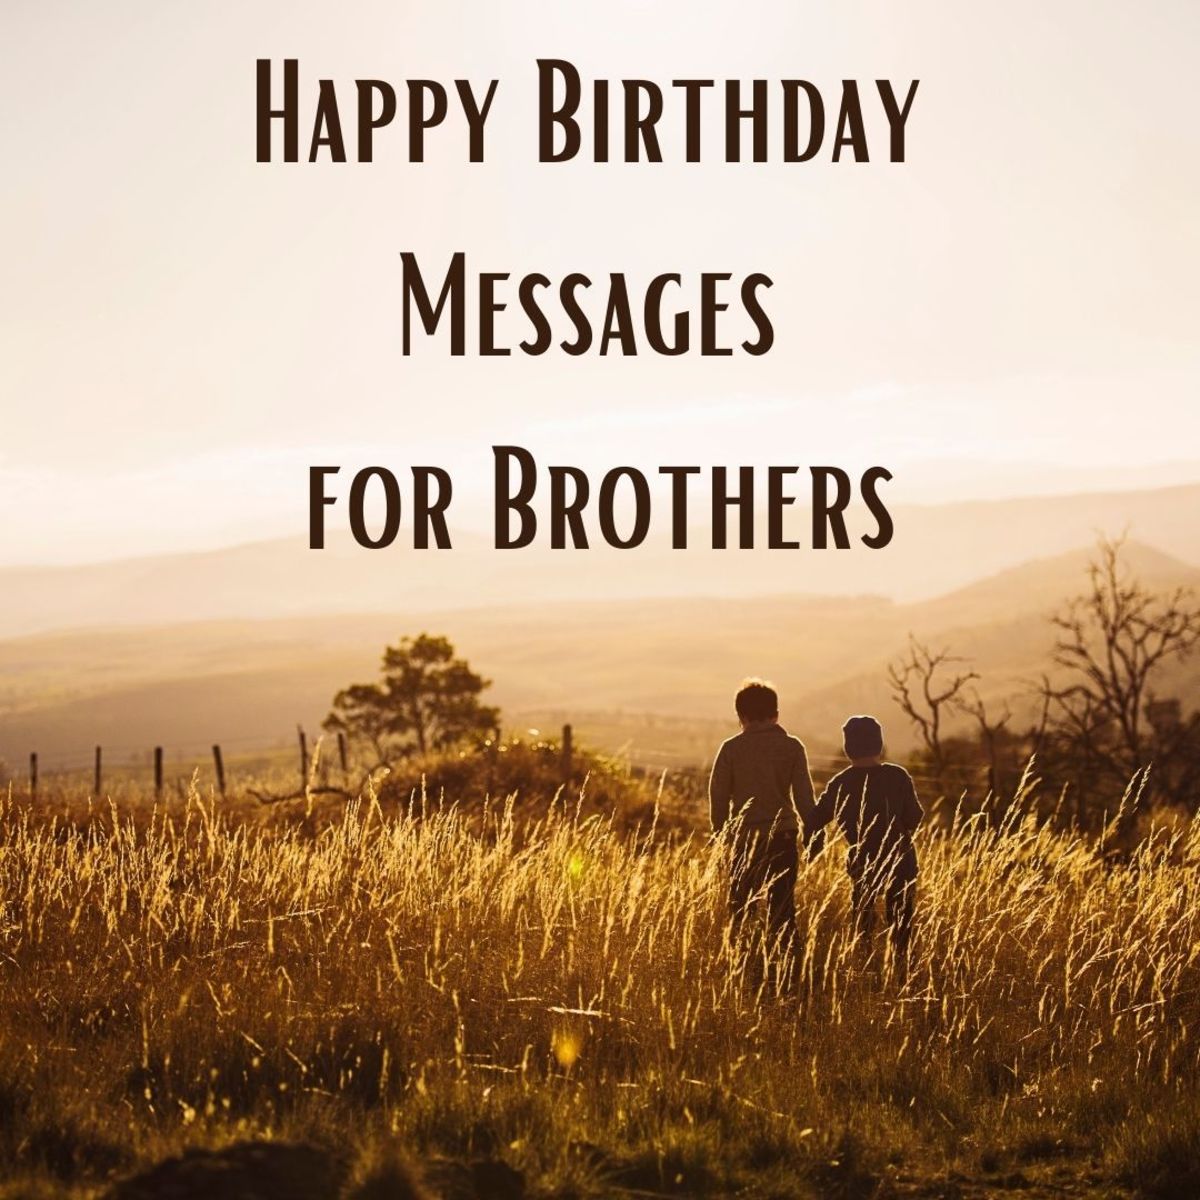 141-birthday-wishes-texts-and-quotes-for-brothers-holidappy-celebrations